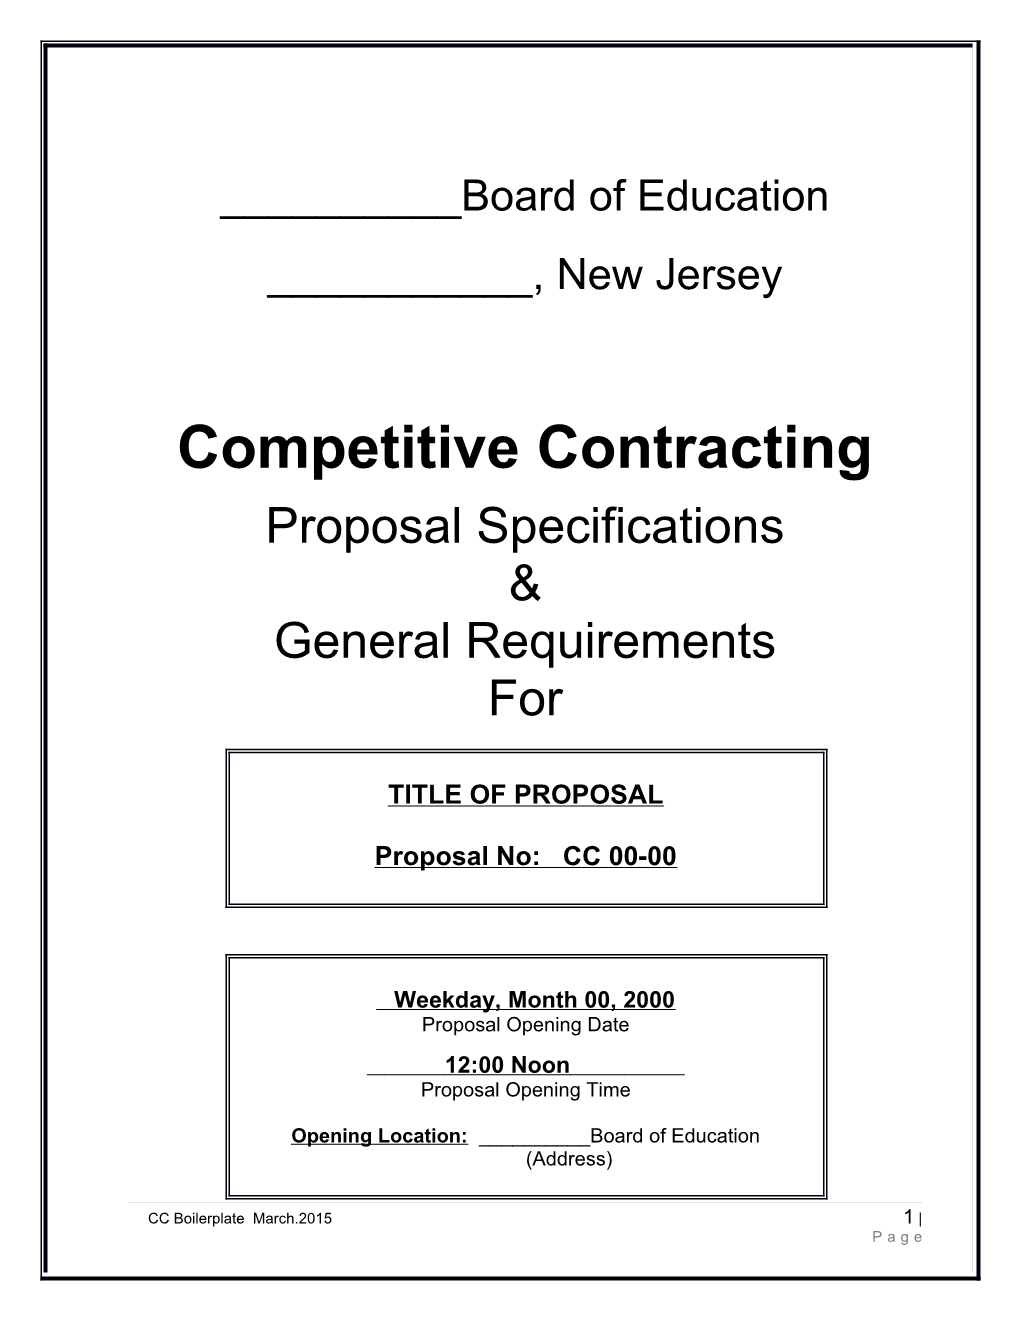 Competitive Contracting